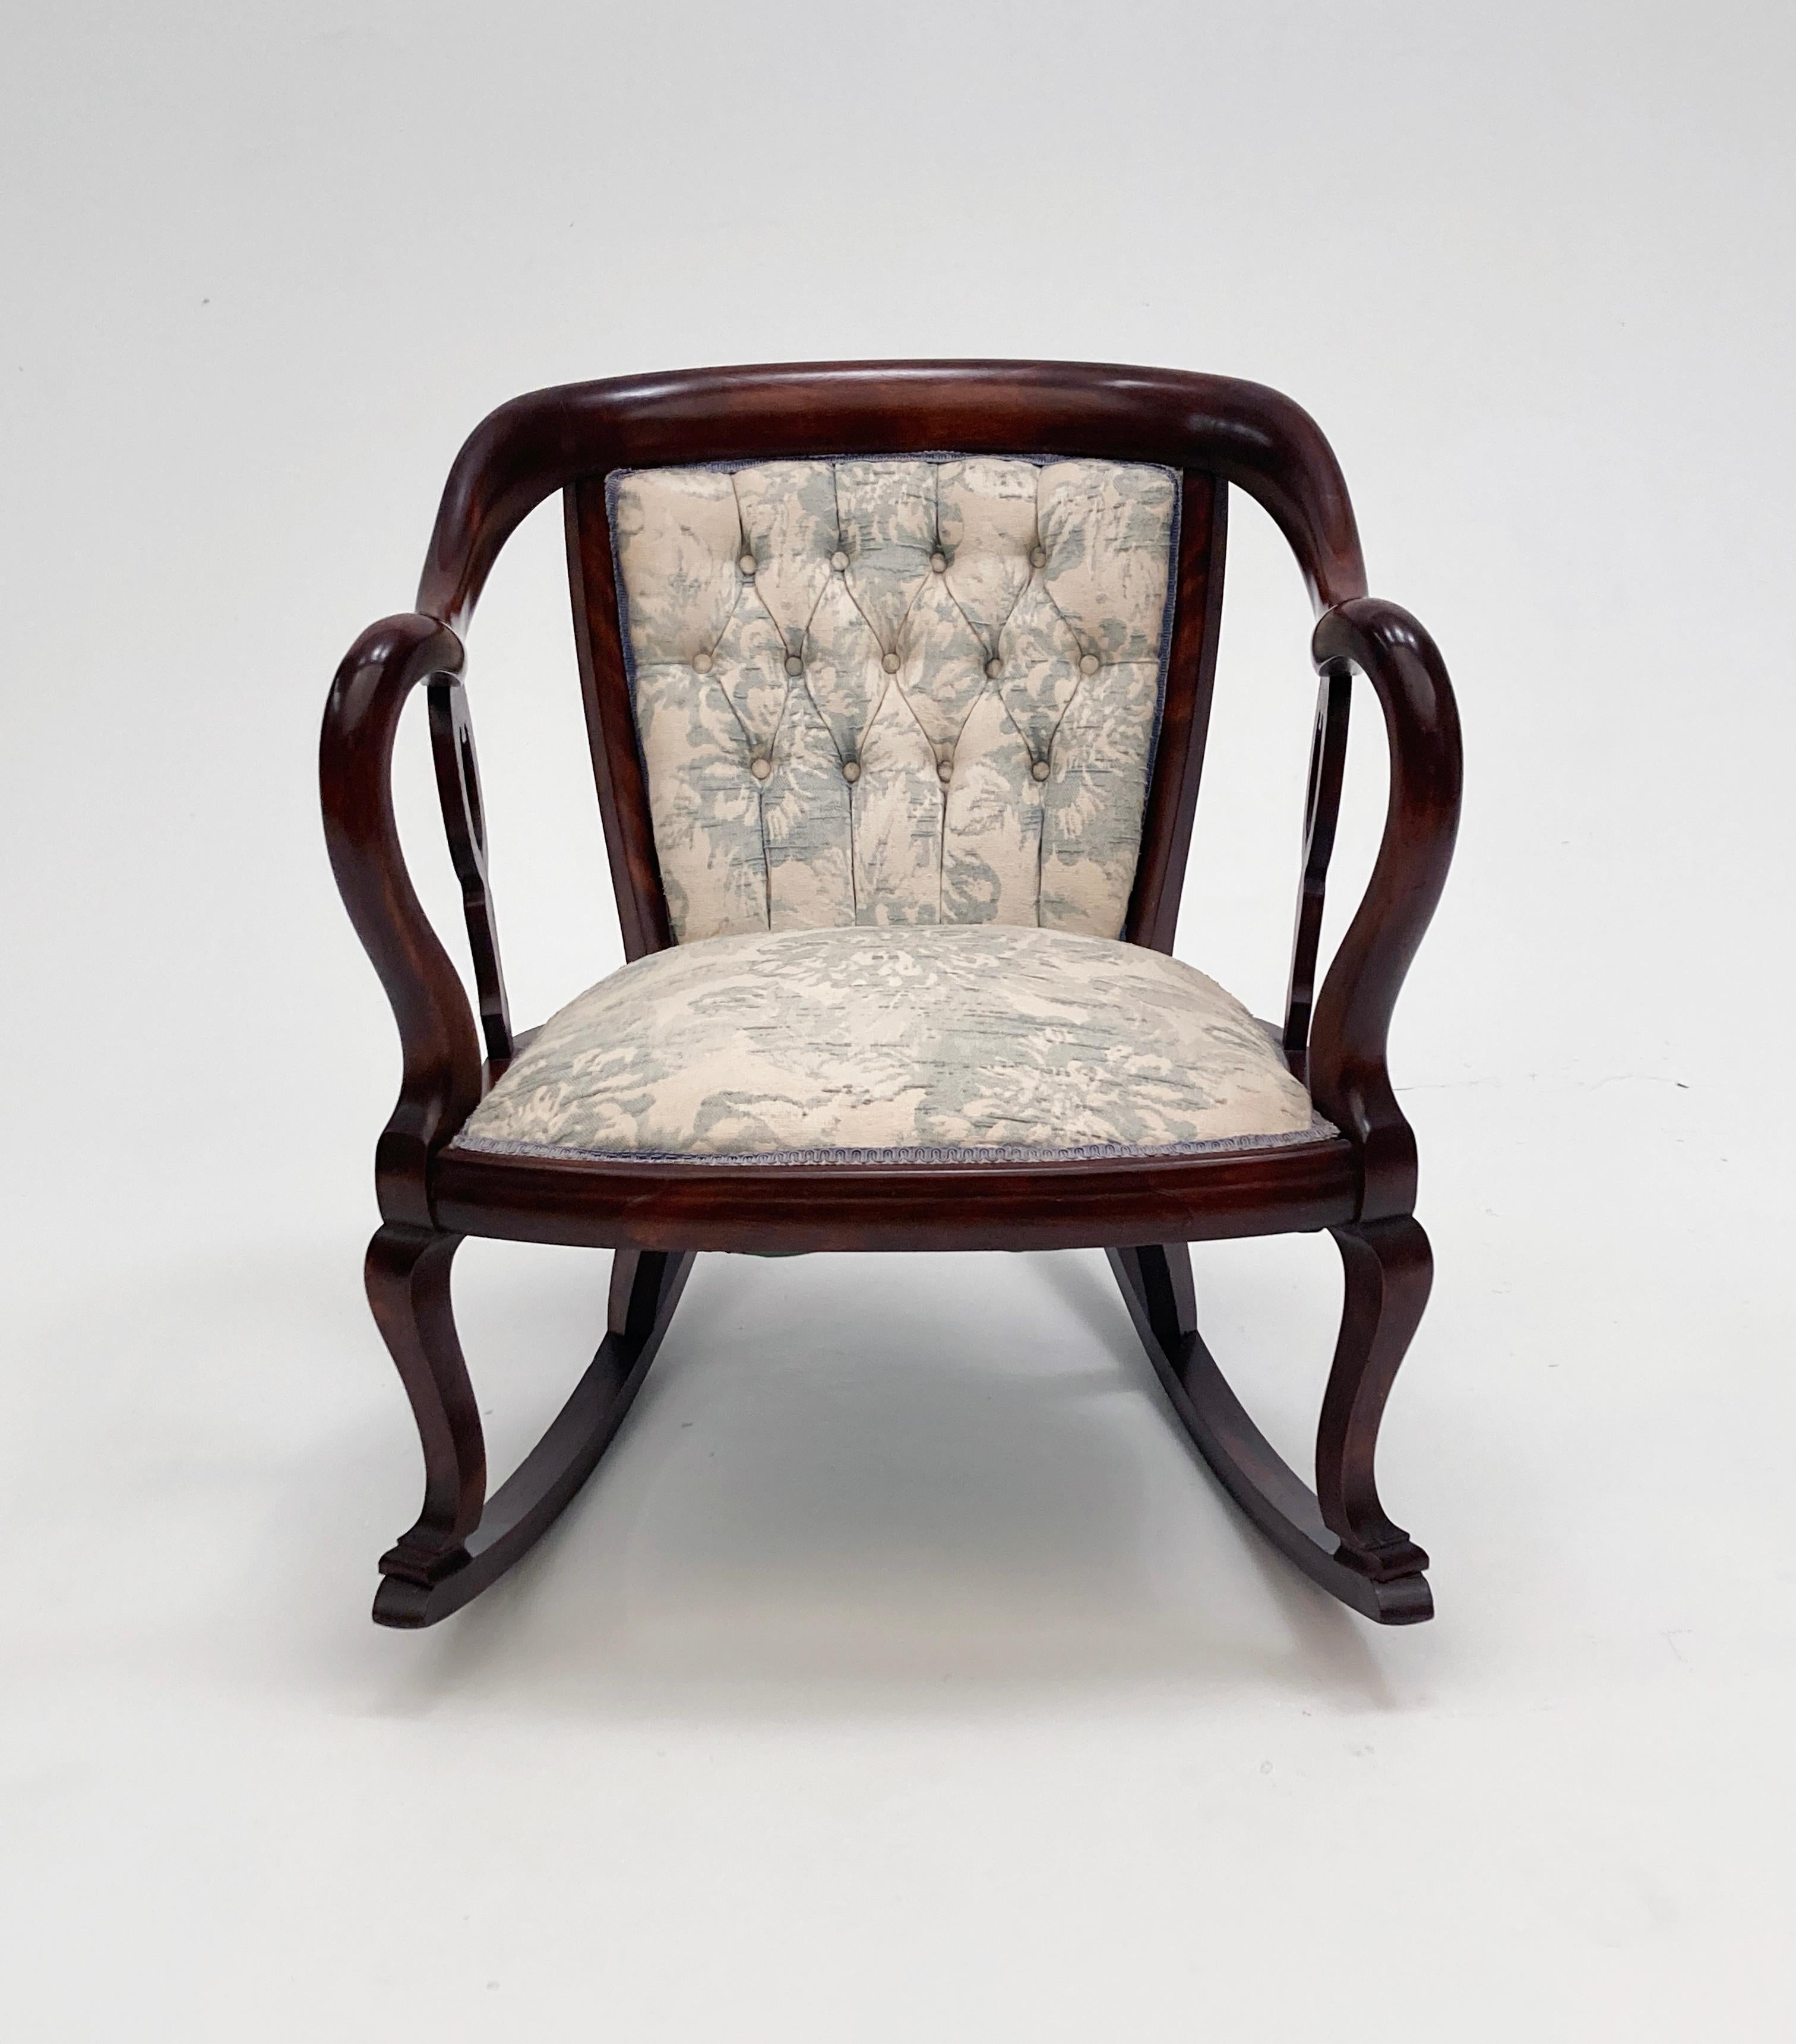 19th Century English Mahogany Settee, Chair and Rocker - Set of Three  For Sale 10